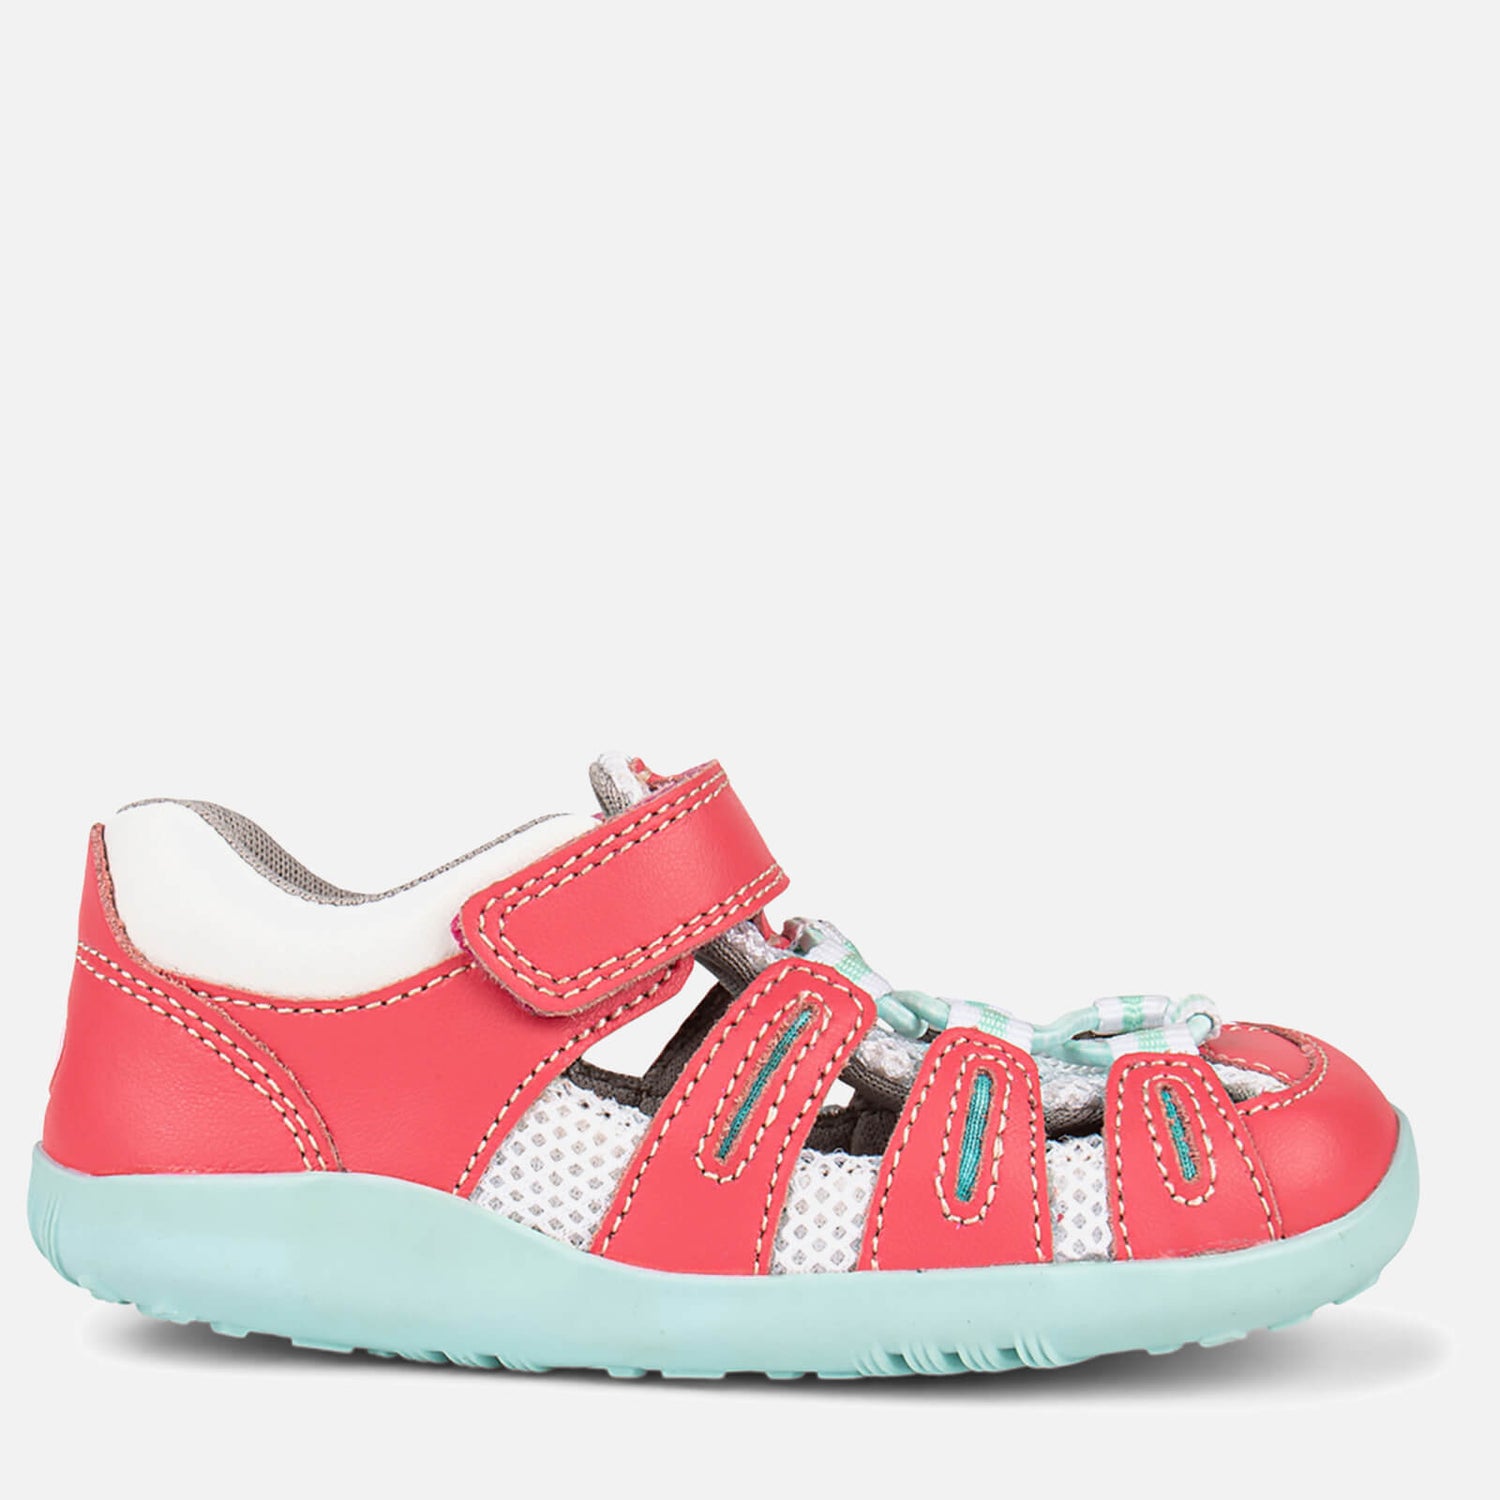 Bobux Toddlers' I-Walk Summit Water Shoes - Guava Mint - UK 8.5 Toddler